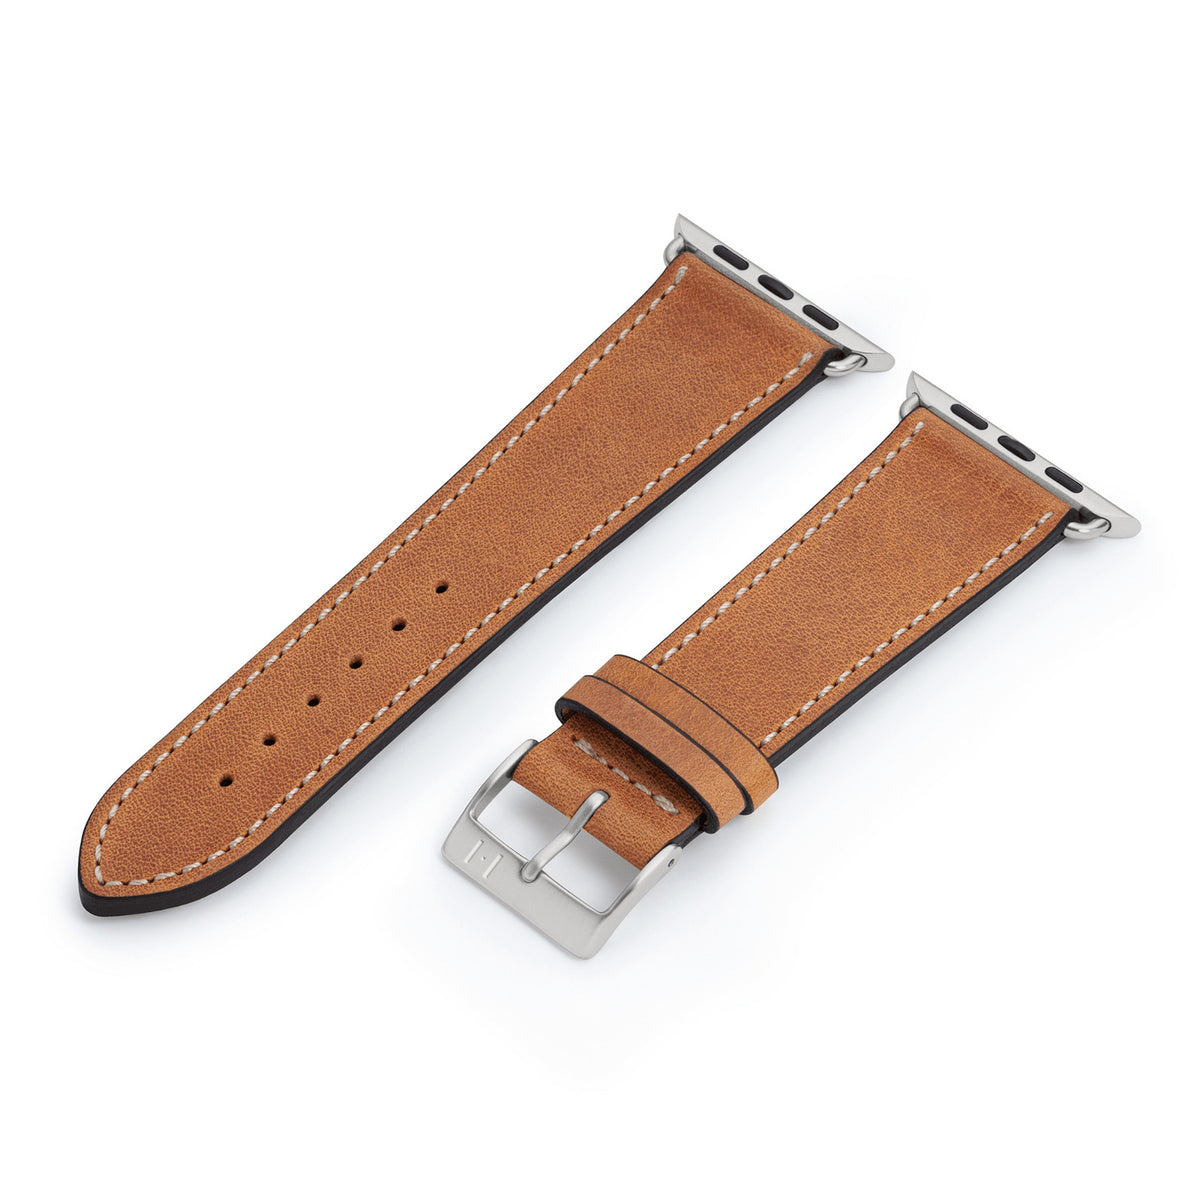 Apple Watch strap made of soft leather “HOHELUFT” – Cognac